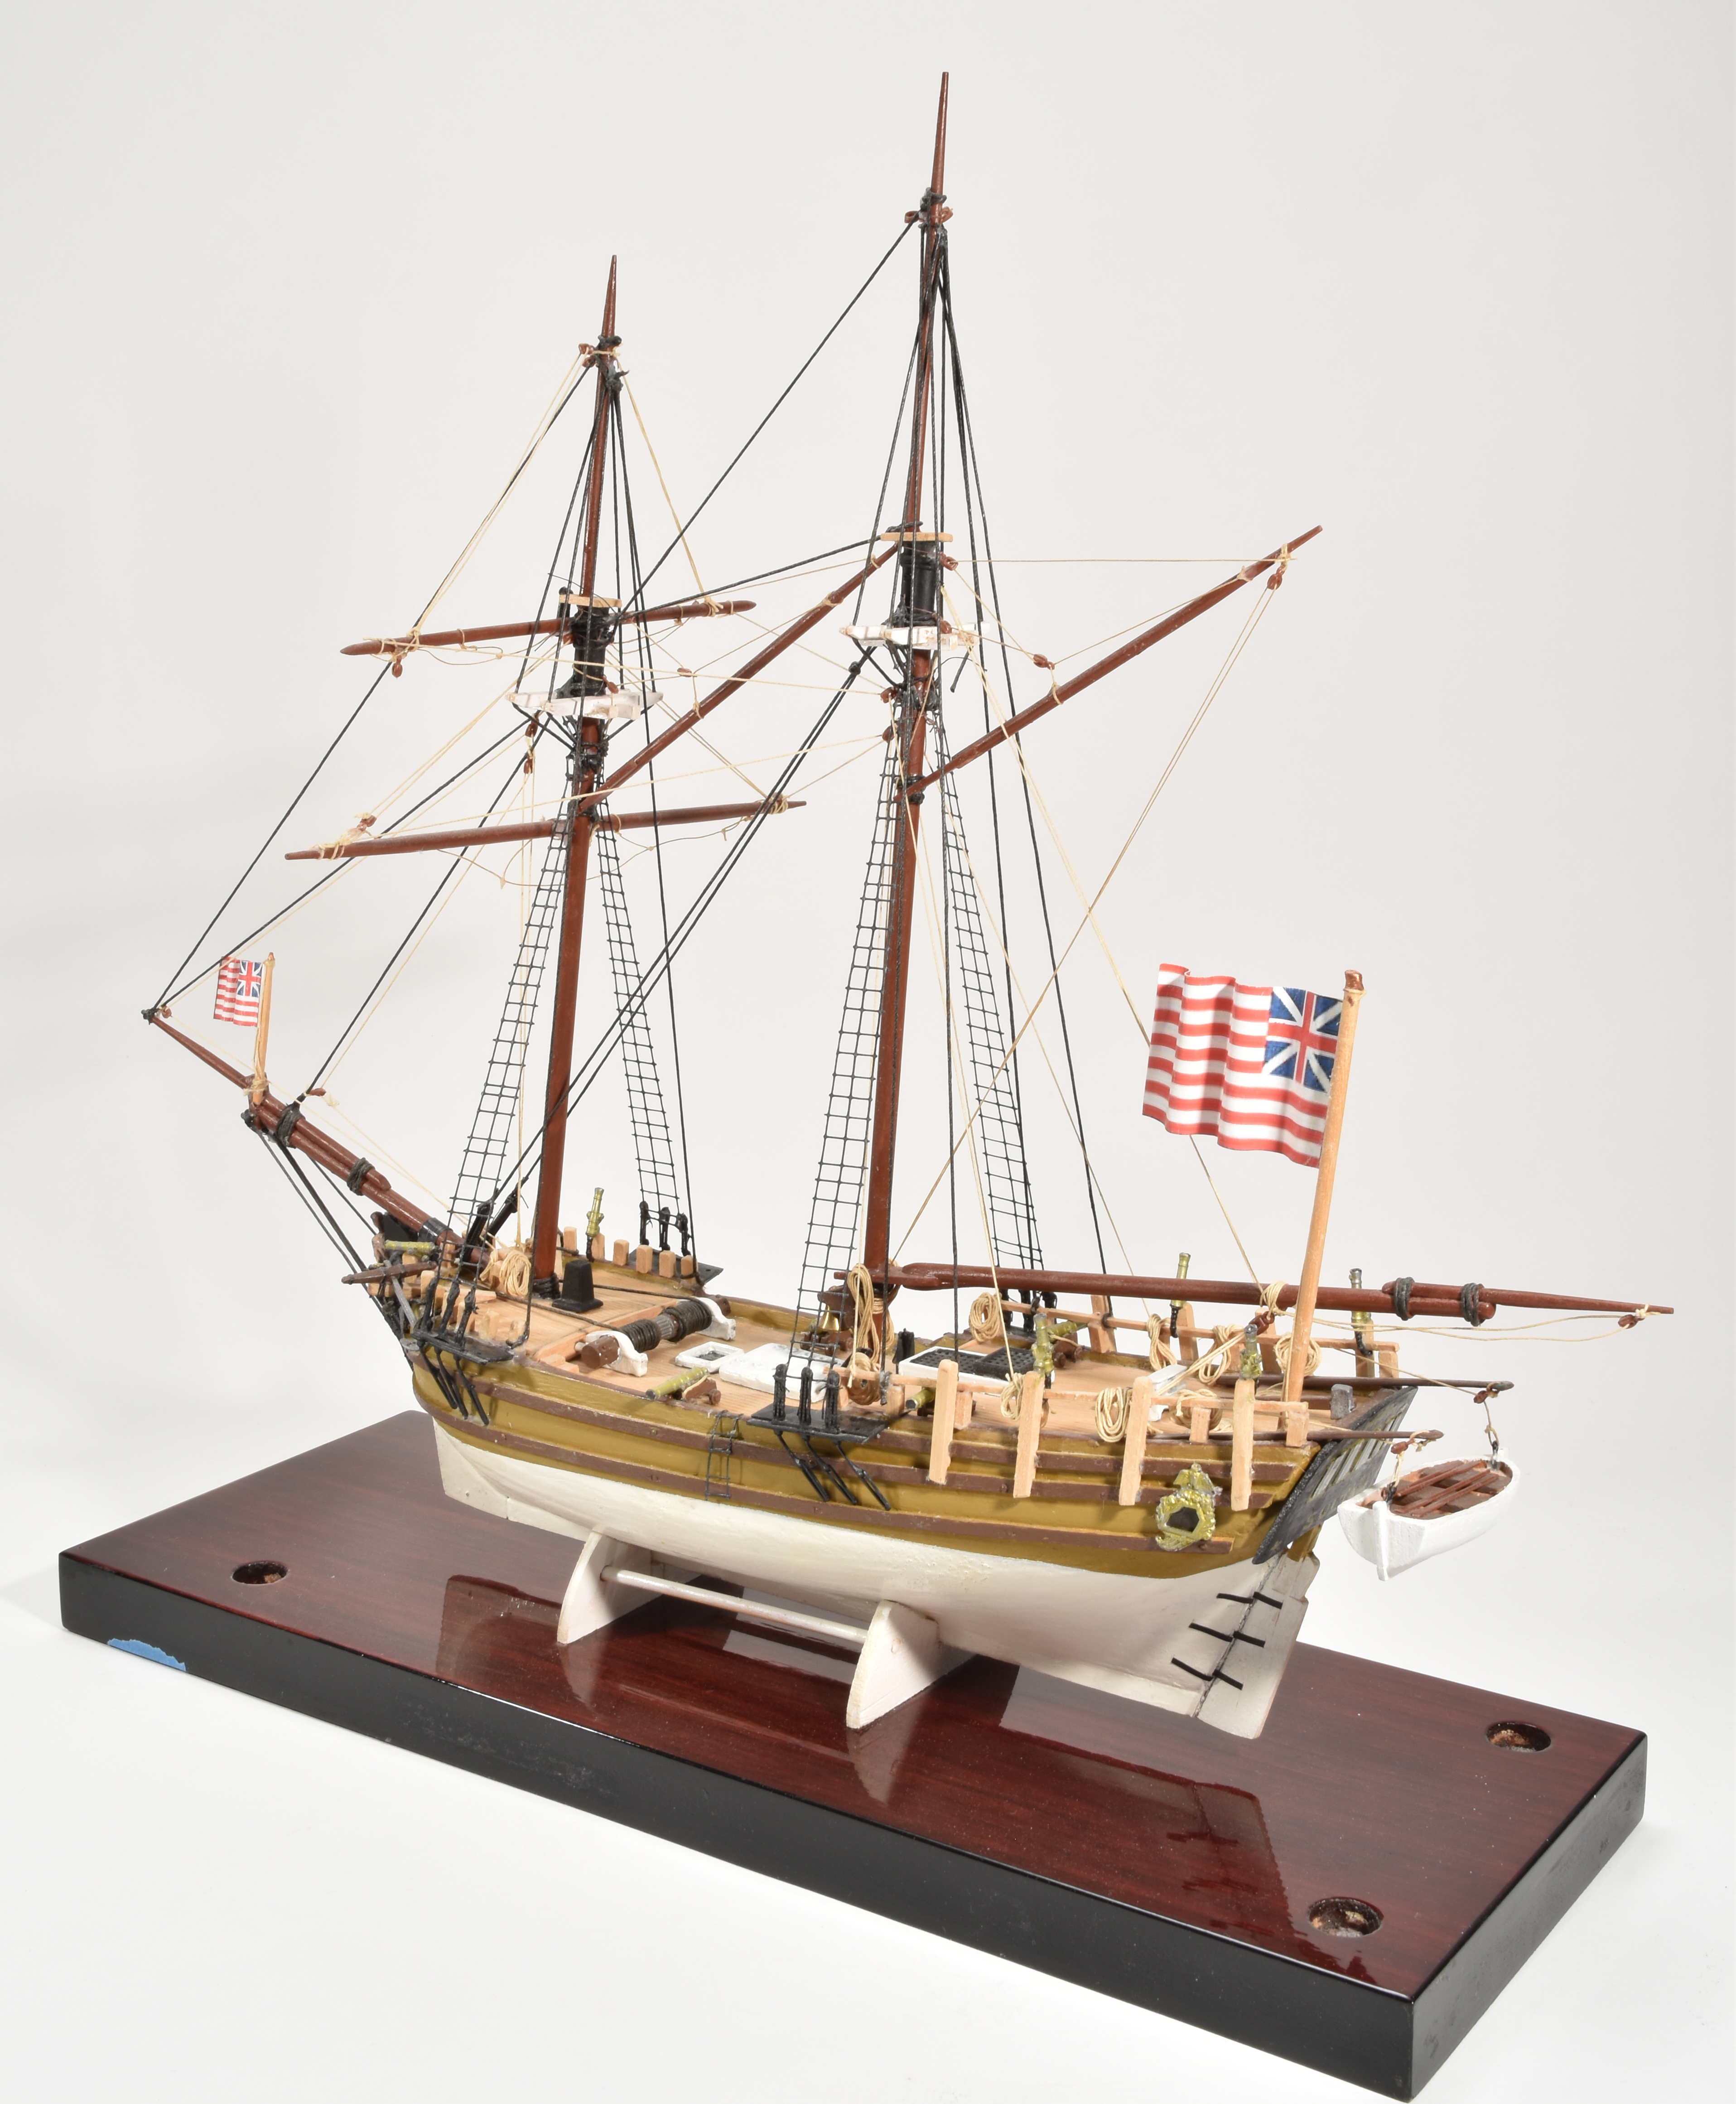 Pyro 1/95 scale Nantucket Lightship - FineScale Modeler - Essential  magazine for scale model builders, model kit reviews, how-to scale  modeling, and scale modeling products